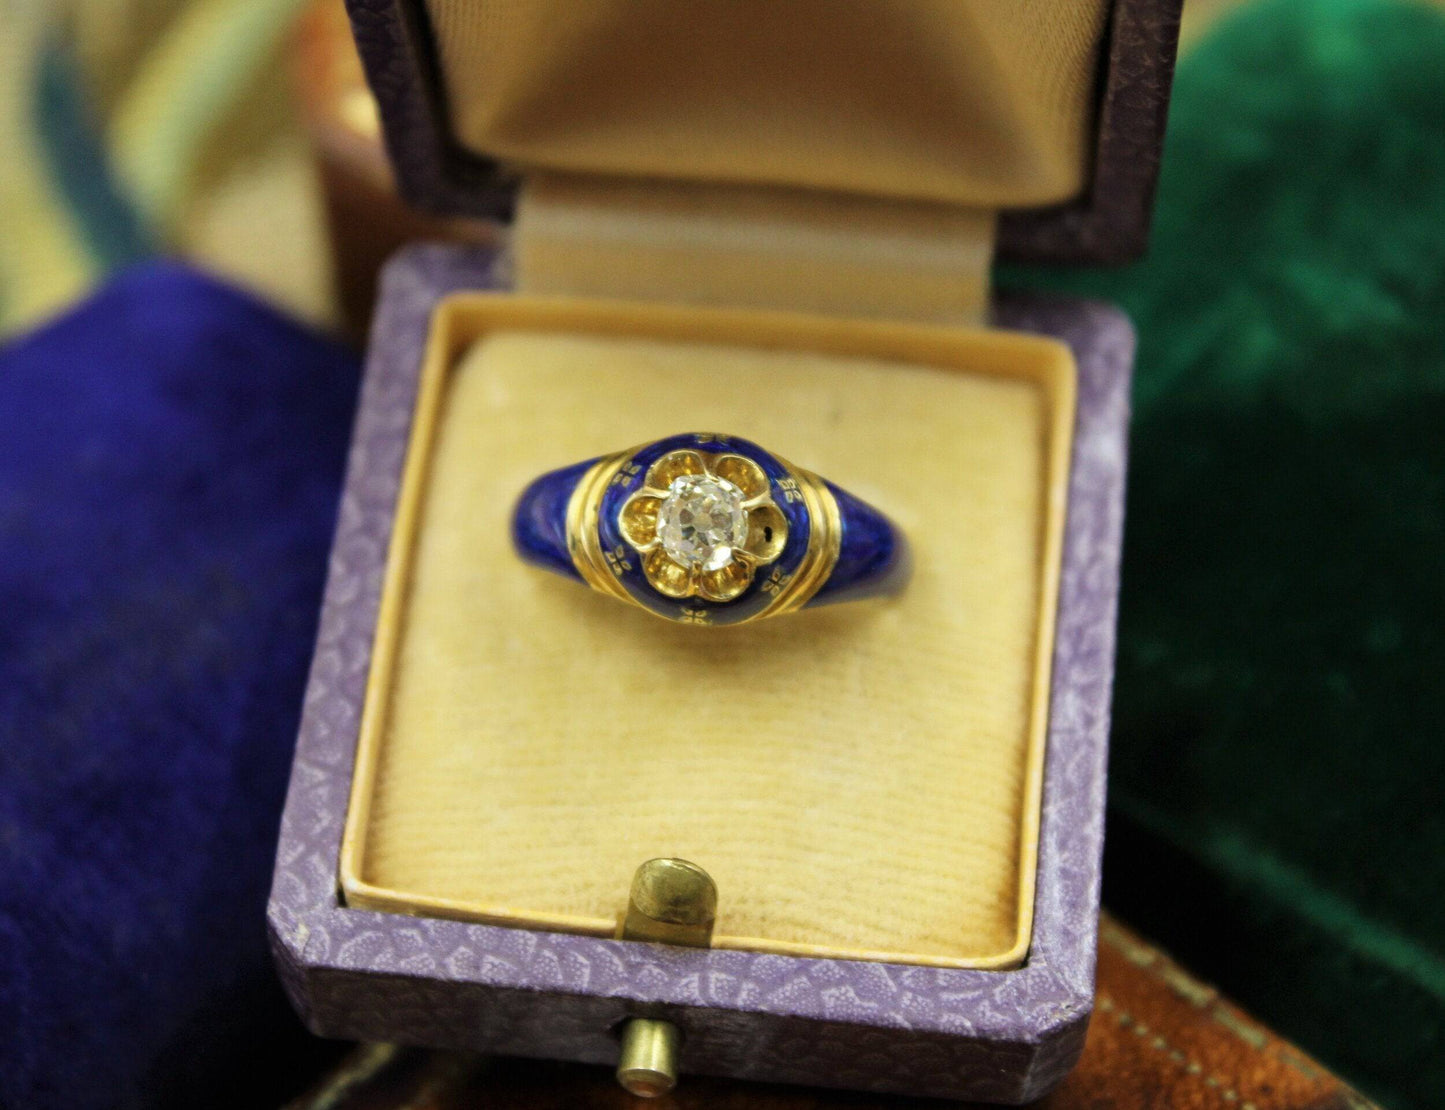 A very fine Diamond and Blue Enamel Mourning Ring set in 18ct Yellow Gold, English, Circa 1850 - Robin Haydock Antiques